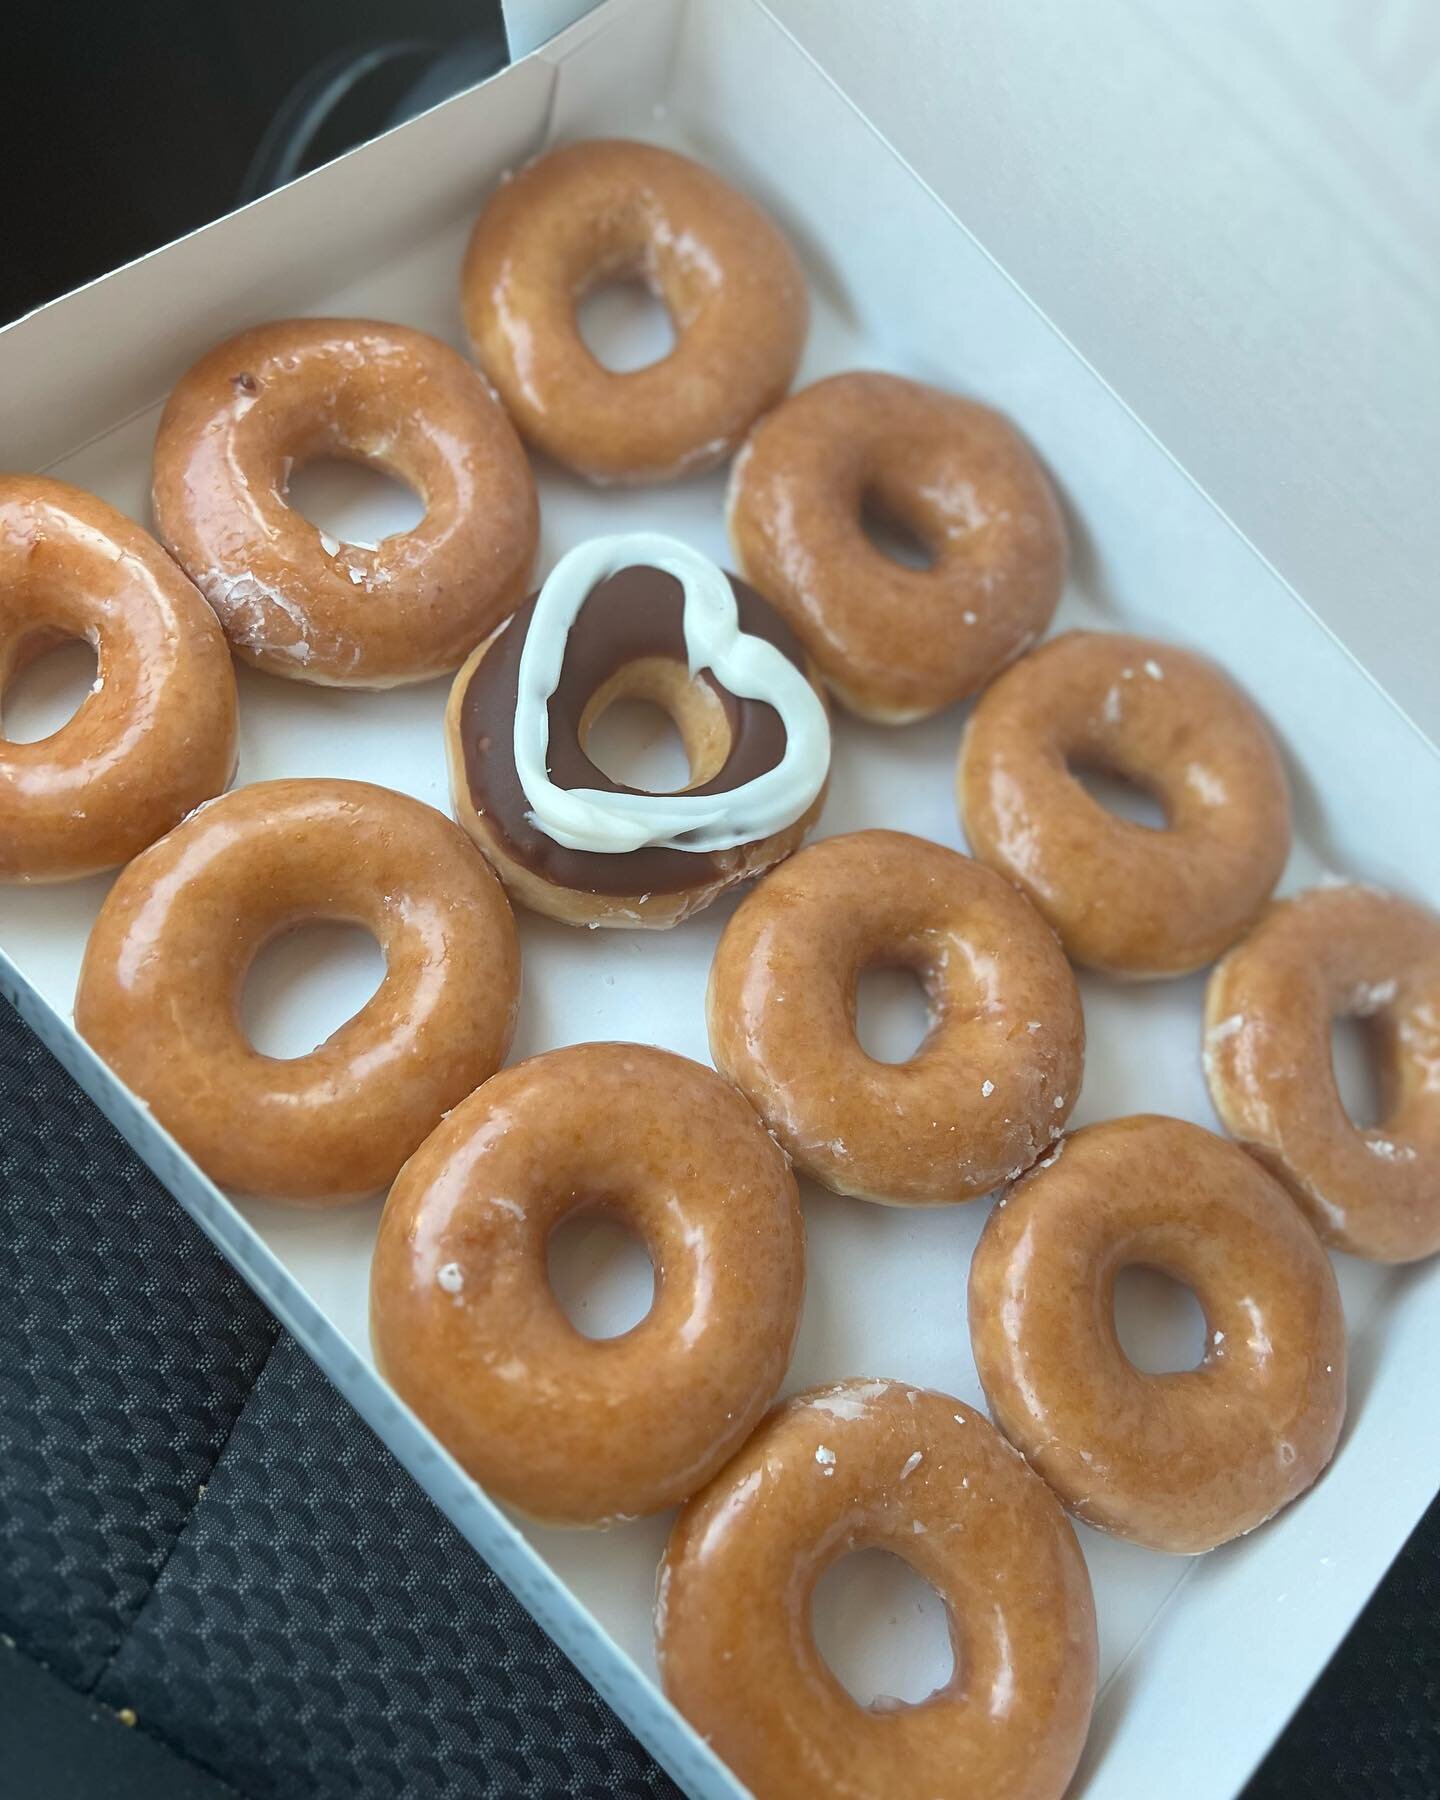 It&rsquo;s World Kindness Day! Thanks to Krispy Kreme for my free dozen this morning. If you didn&rsquo;t know, select Krispy Kreme locations are giving away free boxes of donuts to the first 500 people. I was box number 347 this morning!
#worldkindn